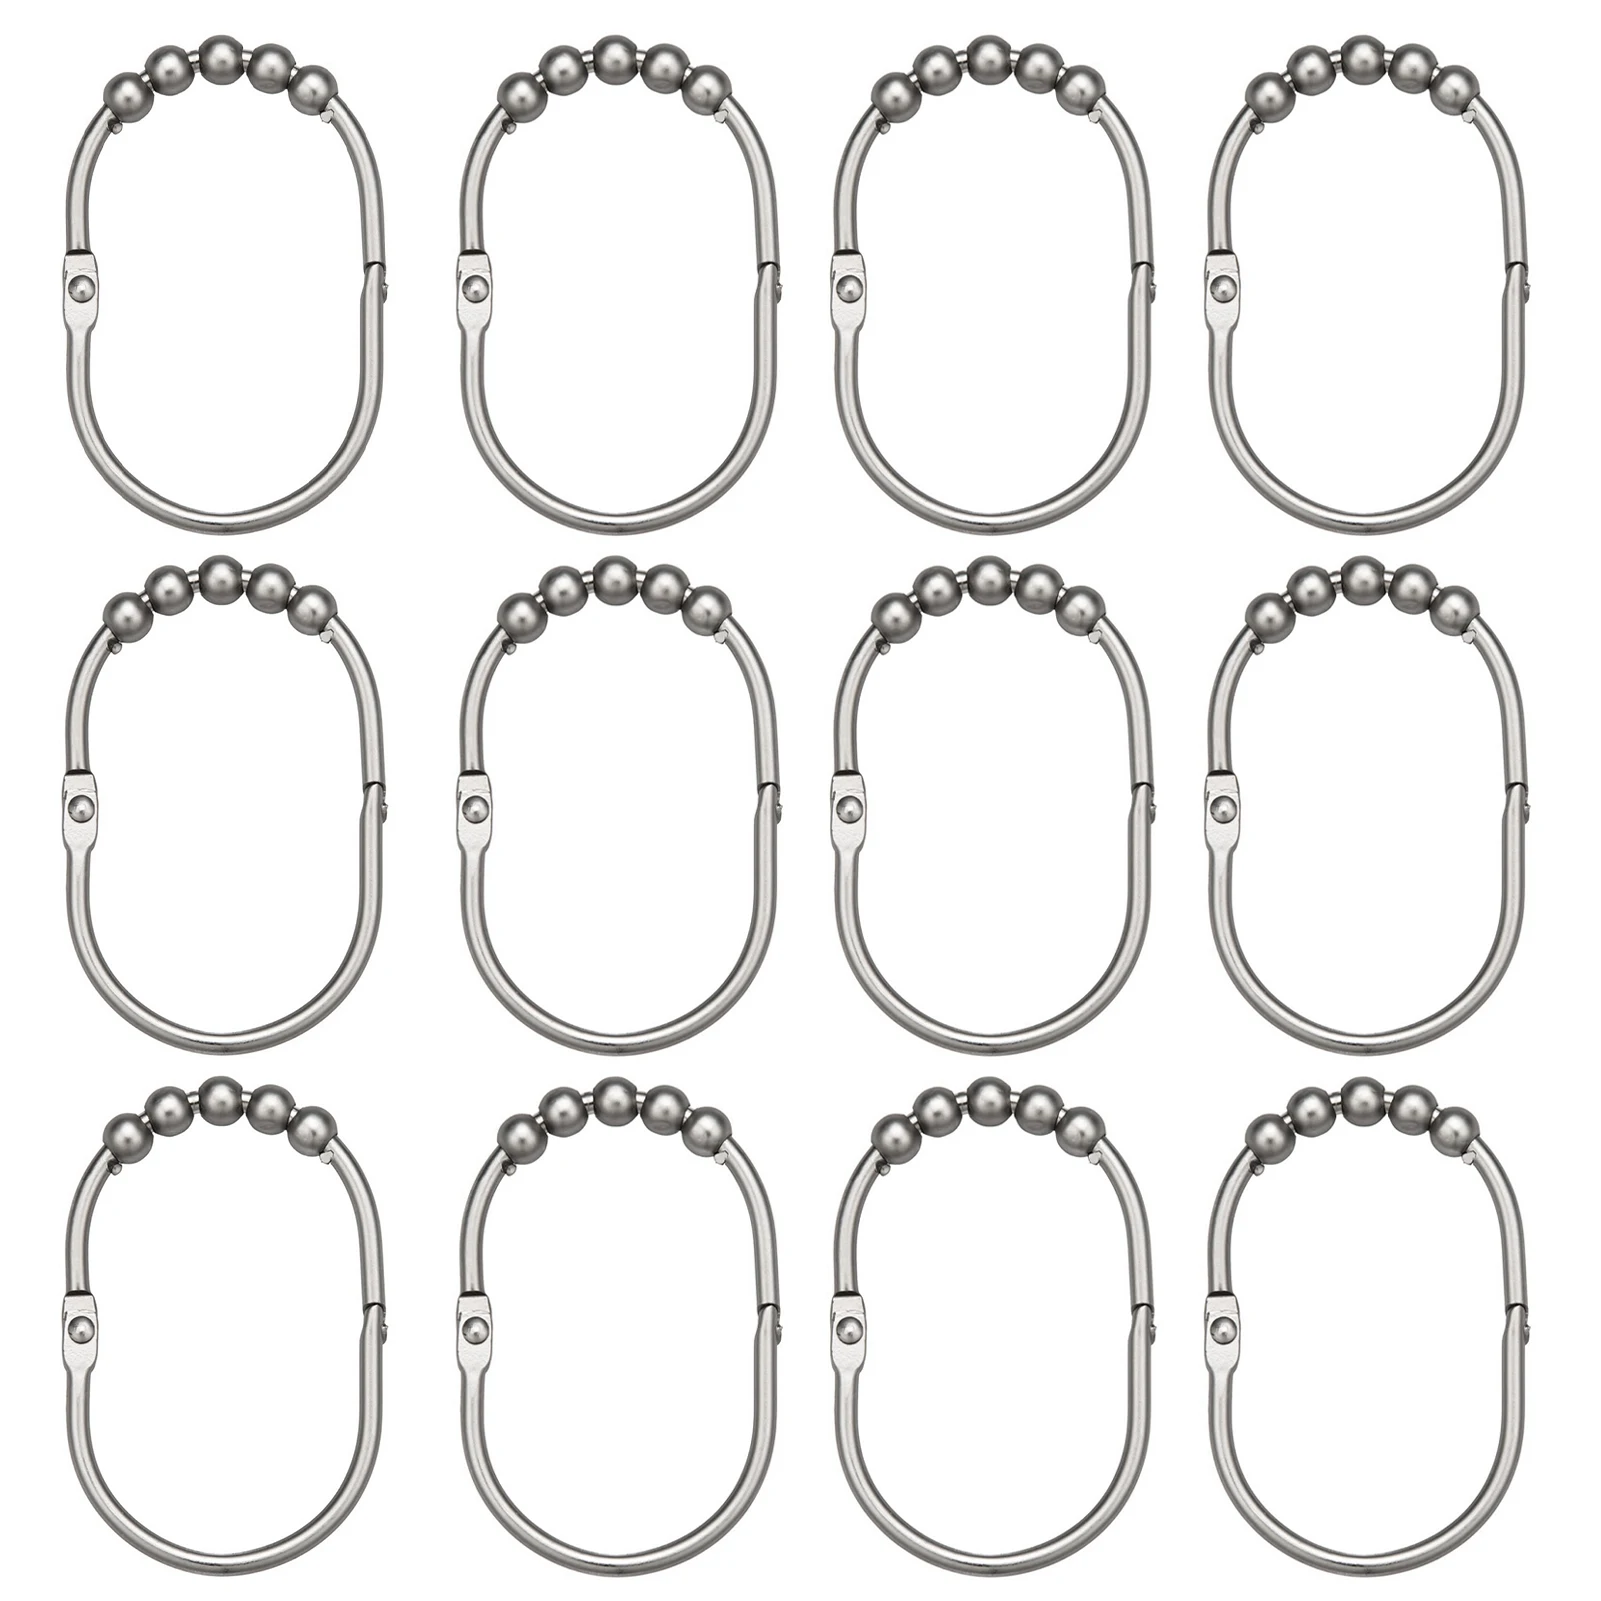 

12pcs Rod Hook 5 Roller Replacement Oval Silver Anti Rust Shower Curtain Ring Home Easy Glide Durable Rails Decorative